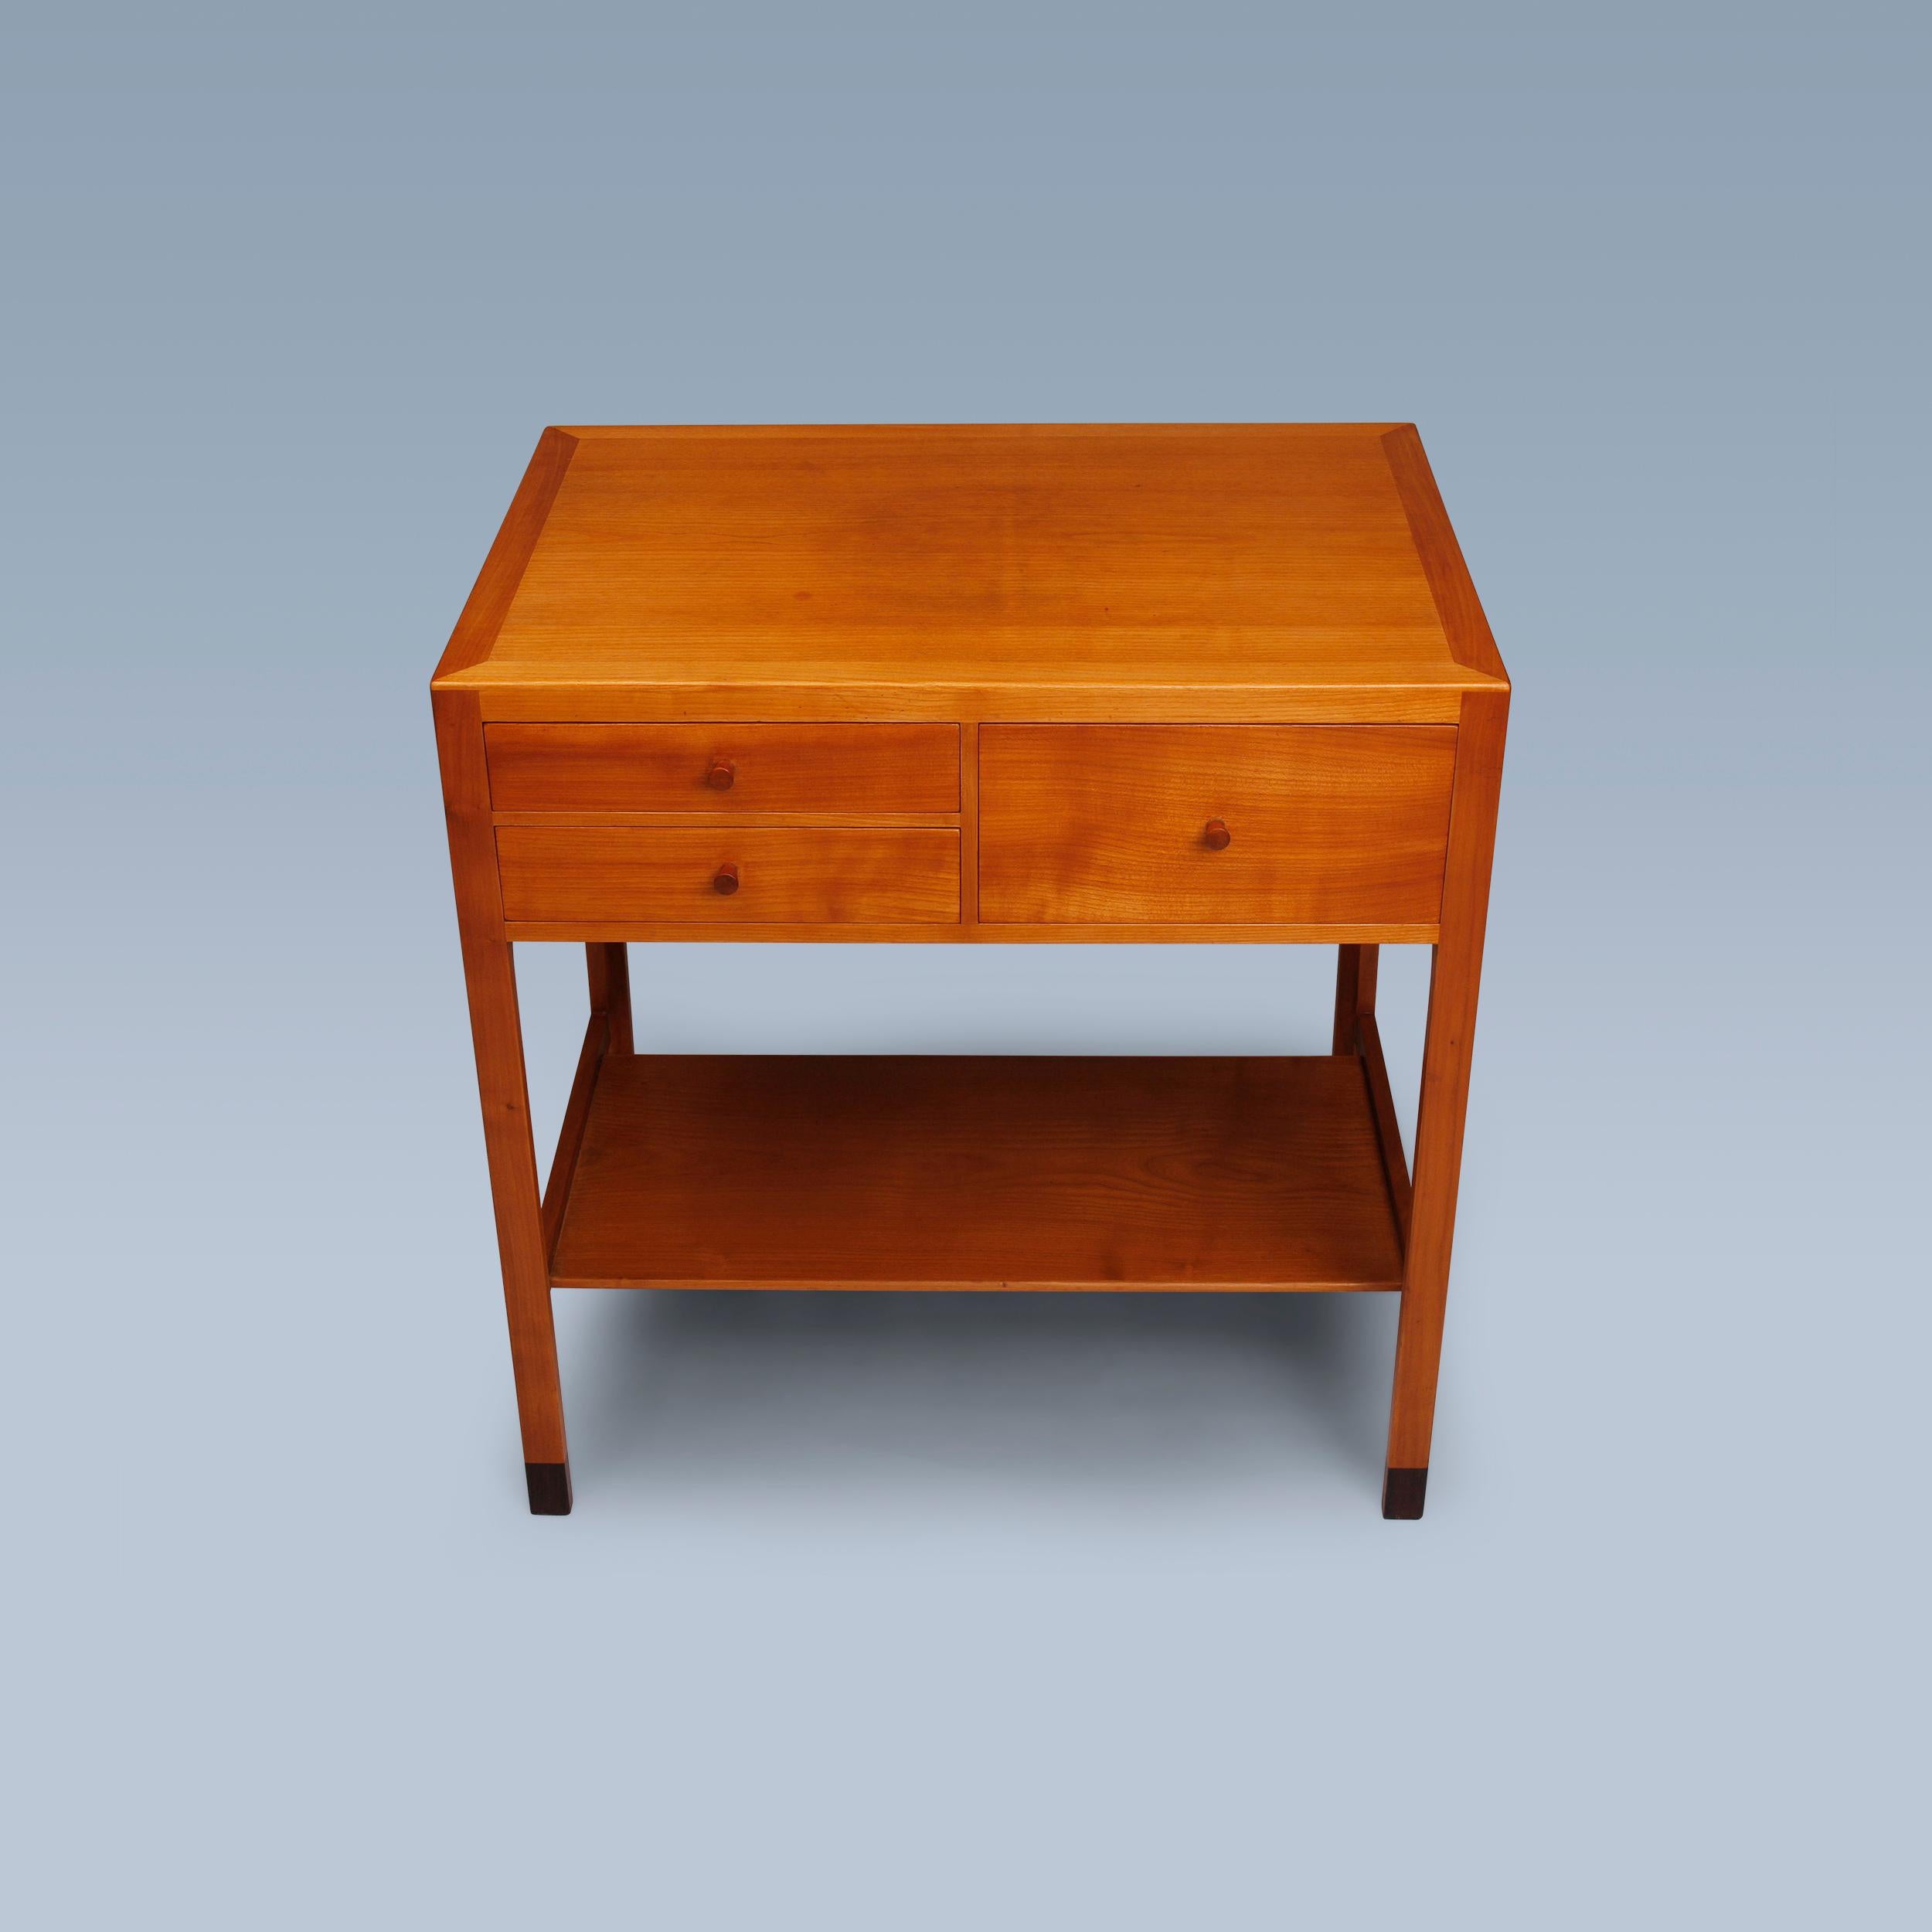 This unique side table was designed in 1948 by Danish architect Hans J. Wegner (1914-2007) and executed by master cabinetmaker Johannes Hansen (1886-1961) for architect Tang Ørnebjerg. The side table was made by special order for his apartment in